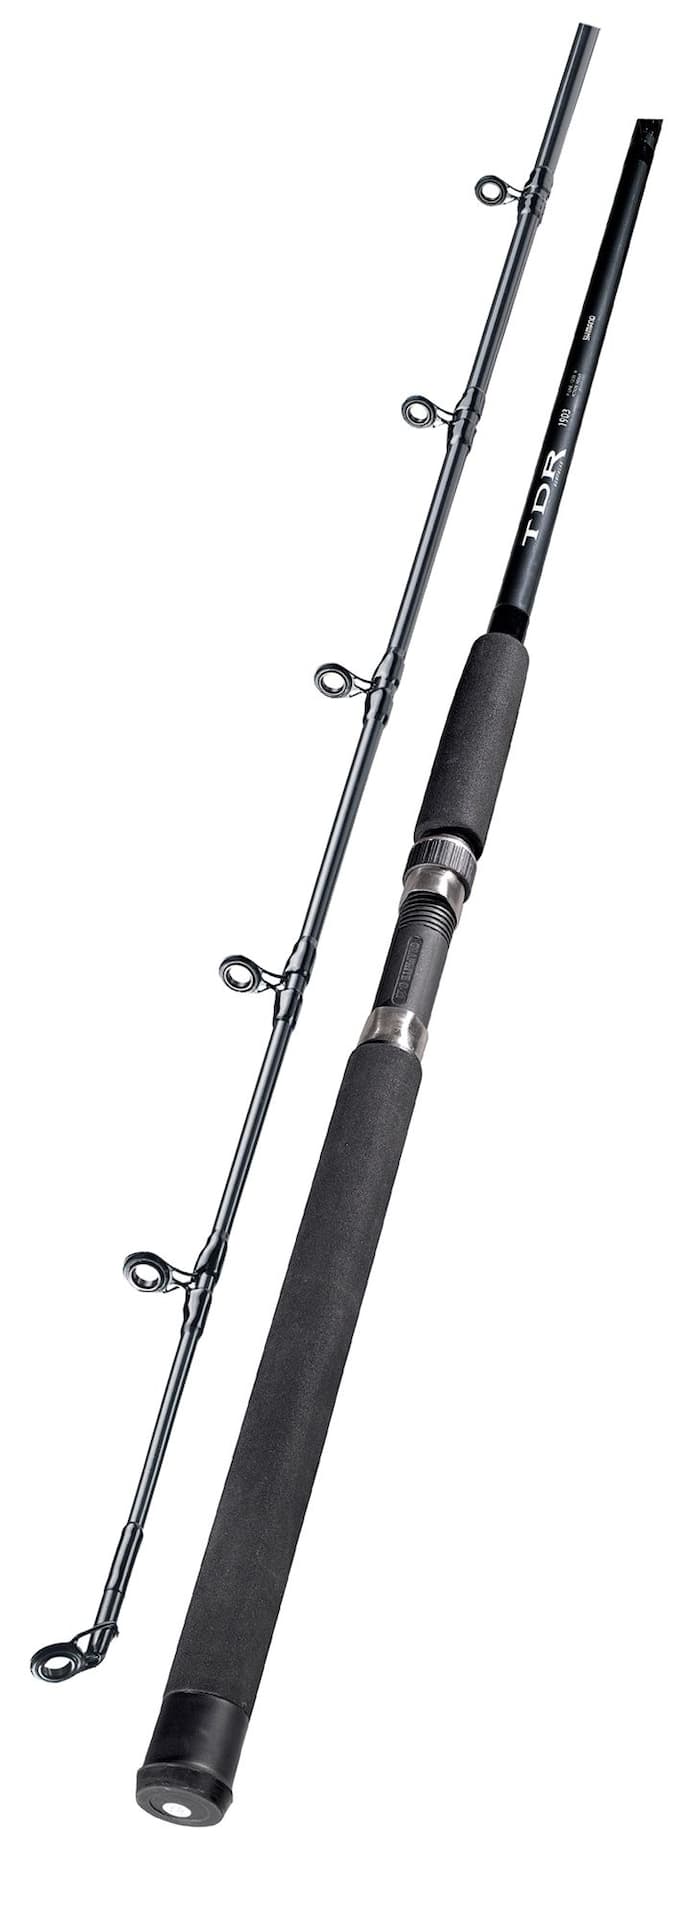 https://media-www.canadiantire.ca/product/playing/fishing/fishing-equipment/0784740/recoded-to-8992703-48bd83be-1fdc-4842-9aaa-3249b95057b2-jpgrendition.jpg